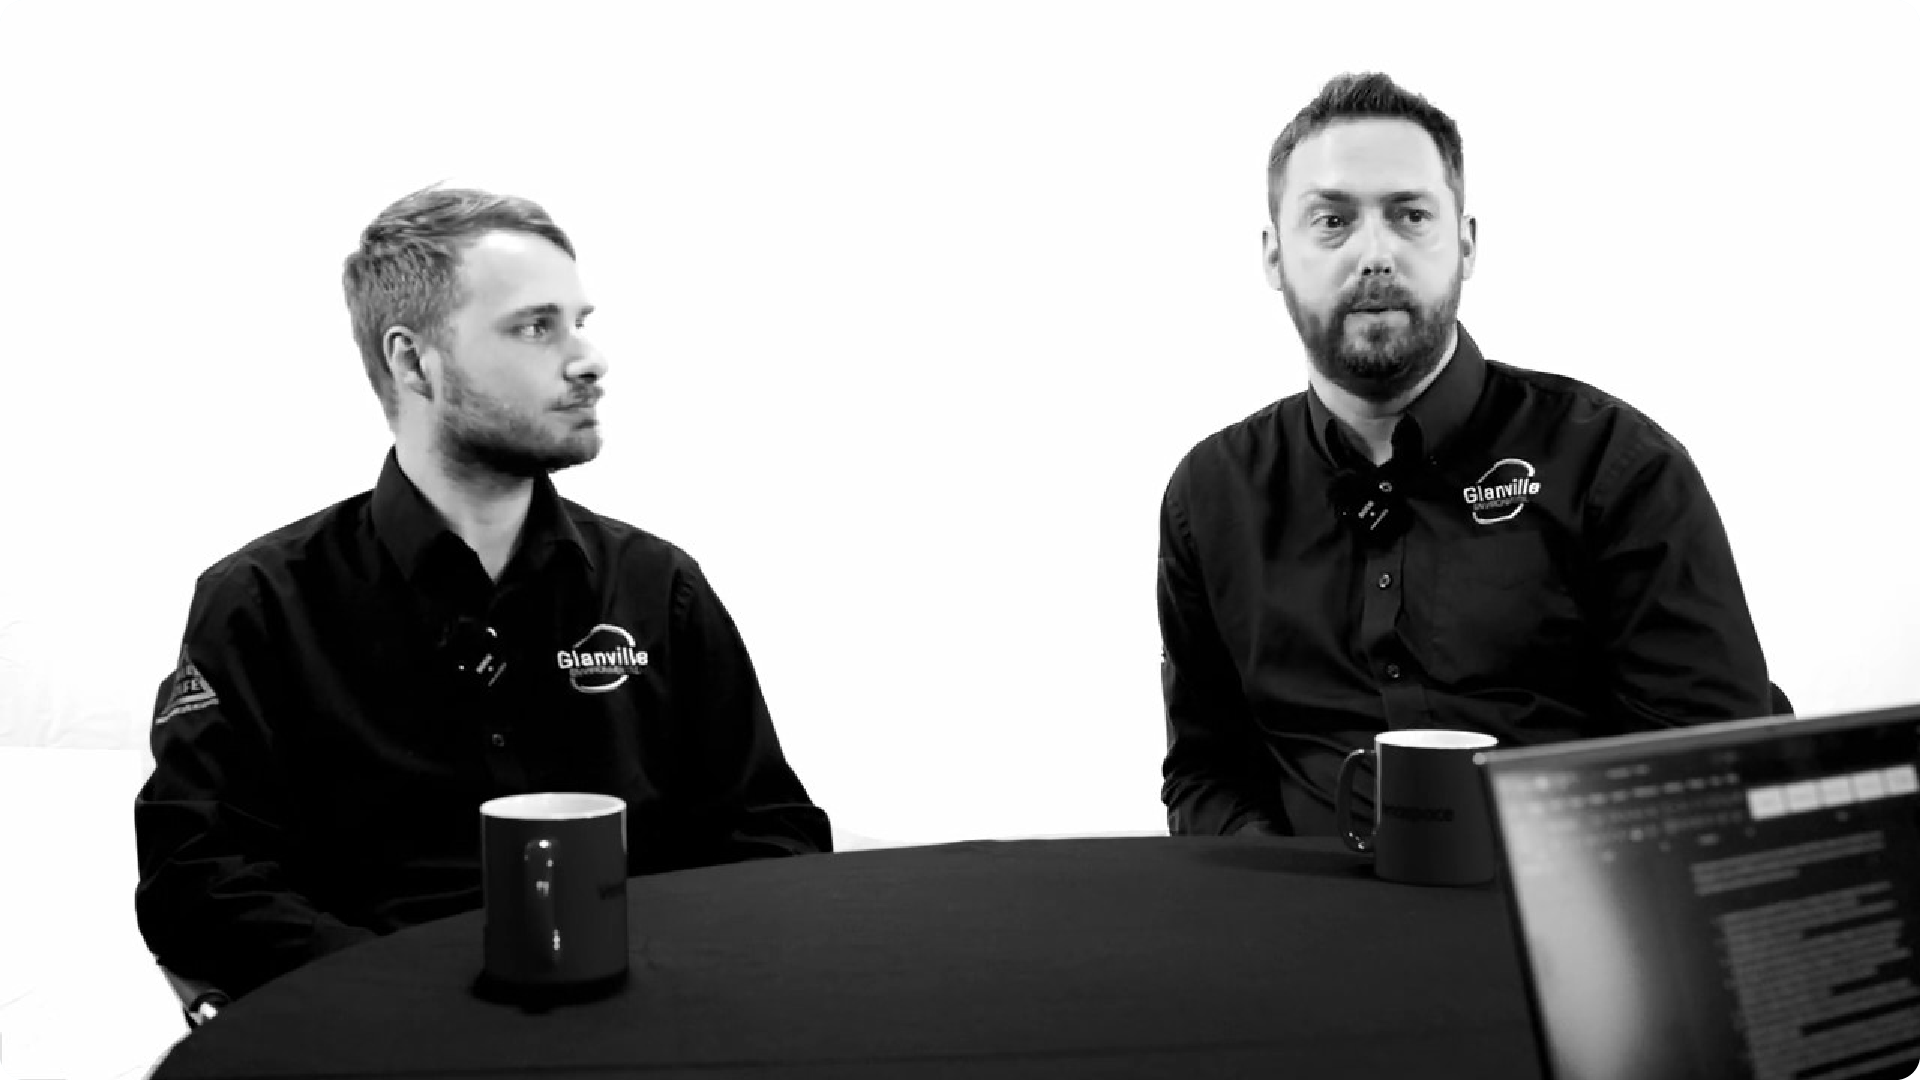 Will Glanville (left), and James Goodman (right), sat down with Re-flow to discuss their insights on the state of the industry, technological advancement and managing growth in the current market landscape. 